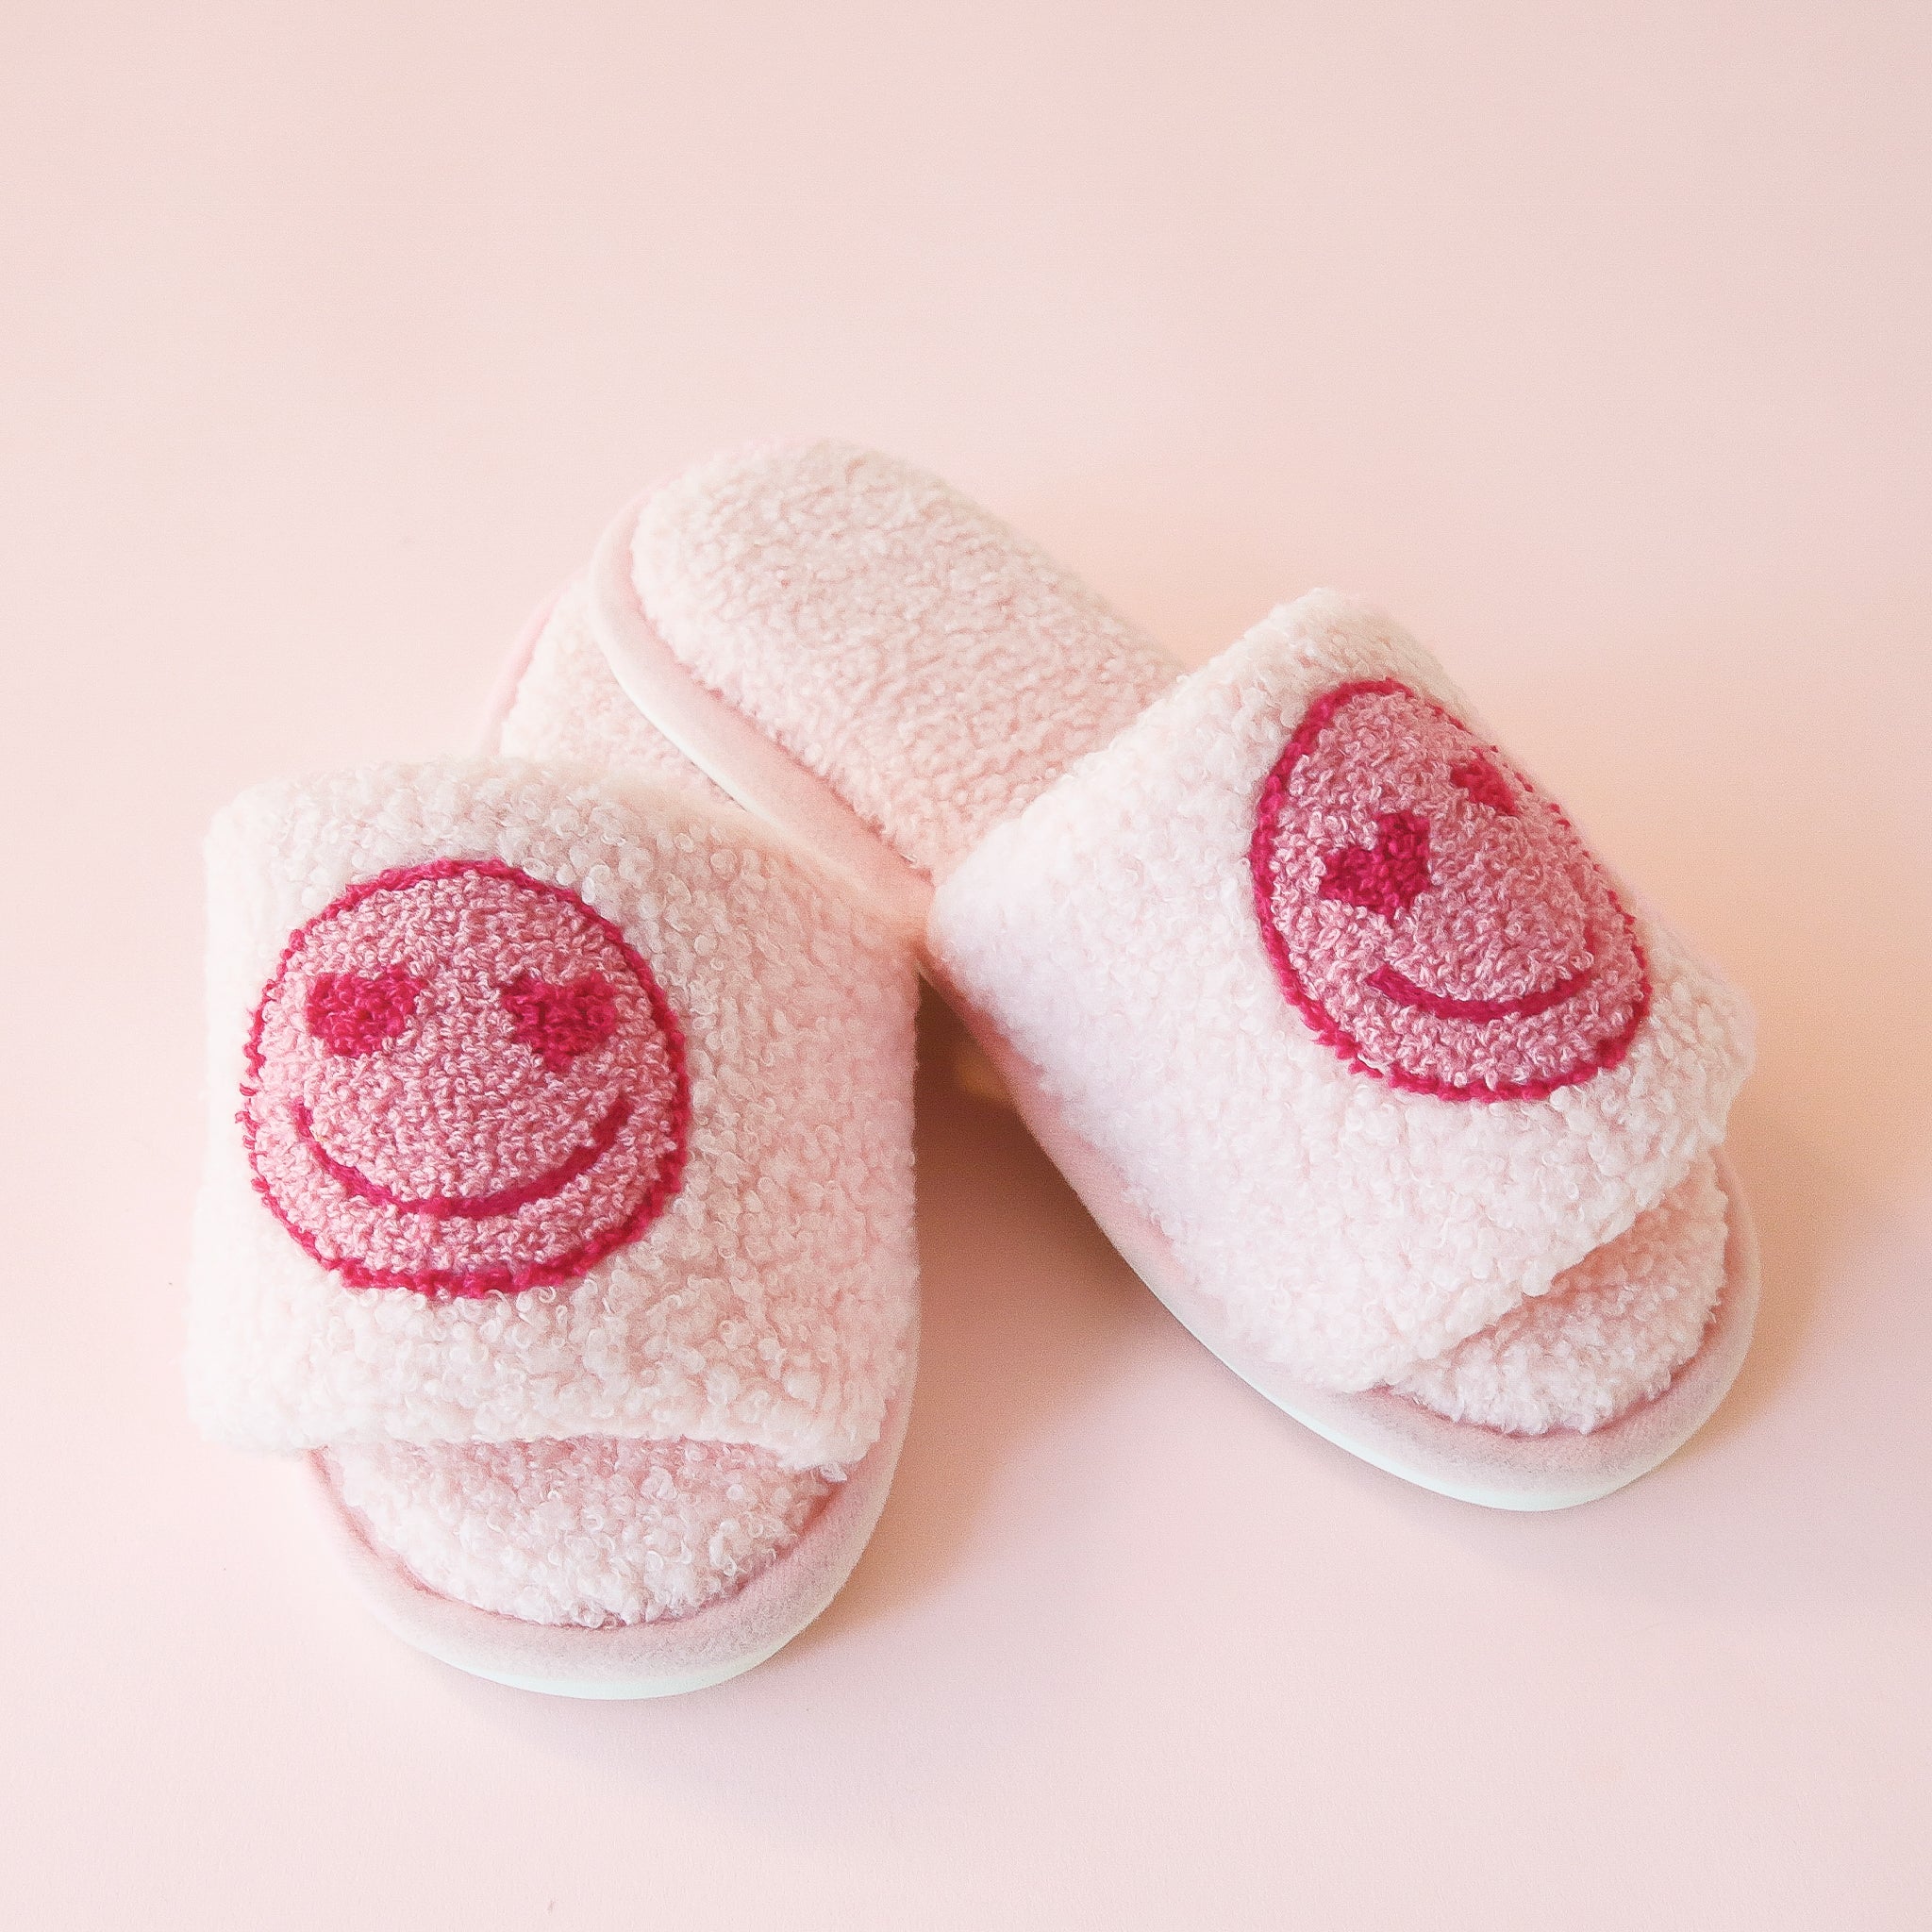 Pink fuzzy slide slippers with a darker pink heart eyes smiley face graphic on the front of each slipper.